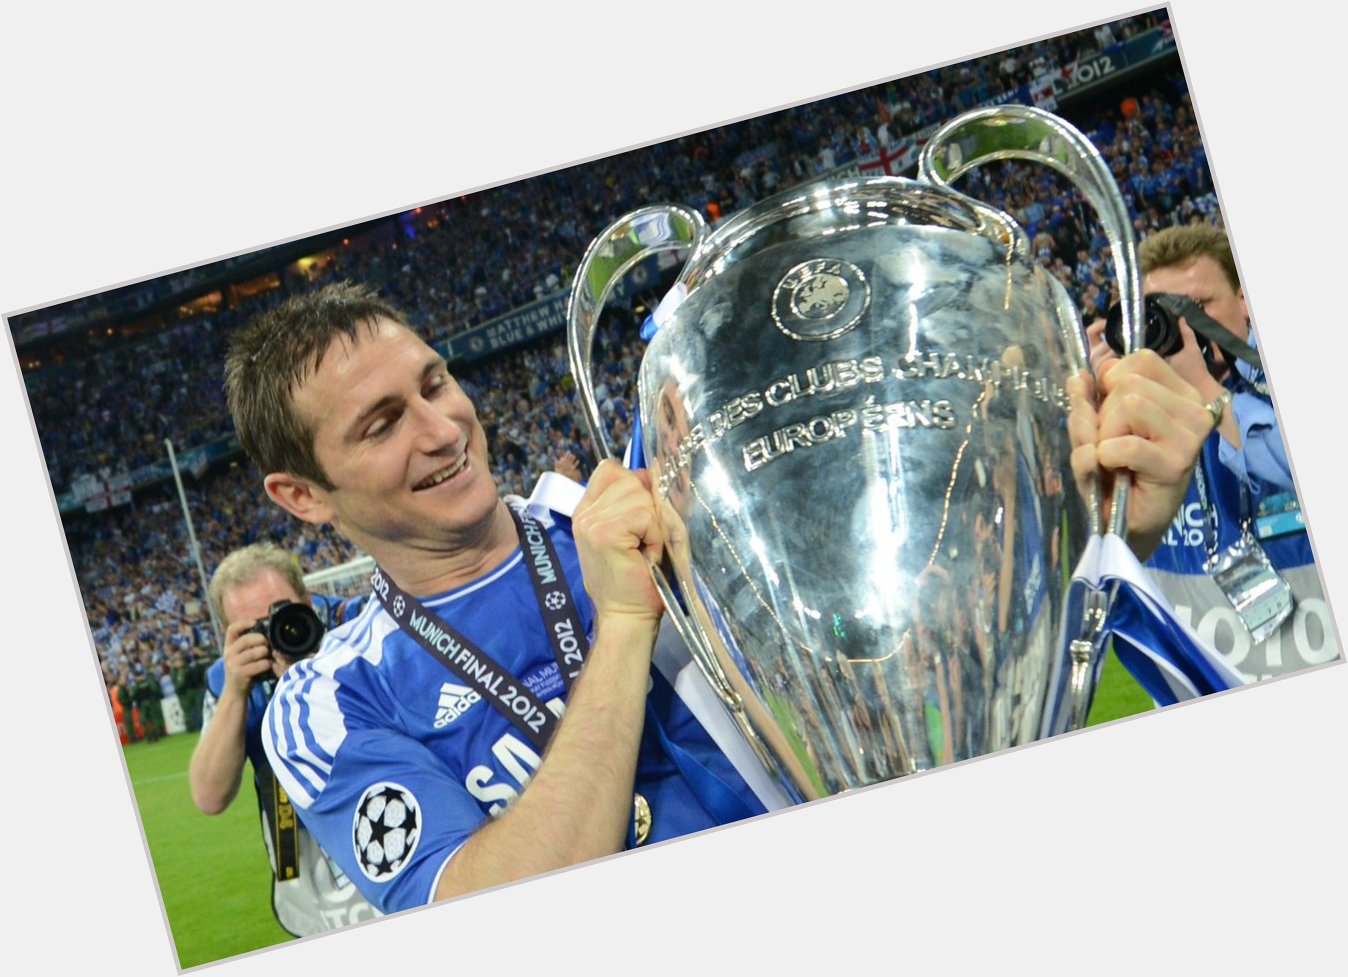 Happy 42nd birthday Super Frank Lampard. Chelsea legend as a player, and soon to be a Chelsea legend as a manager 